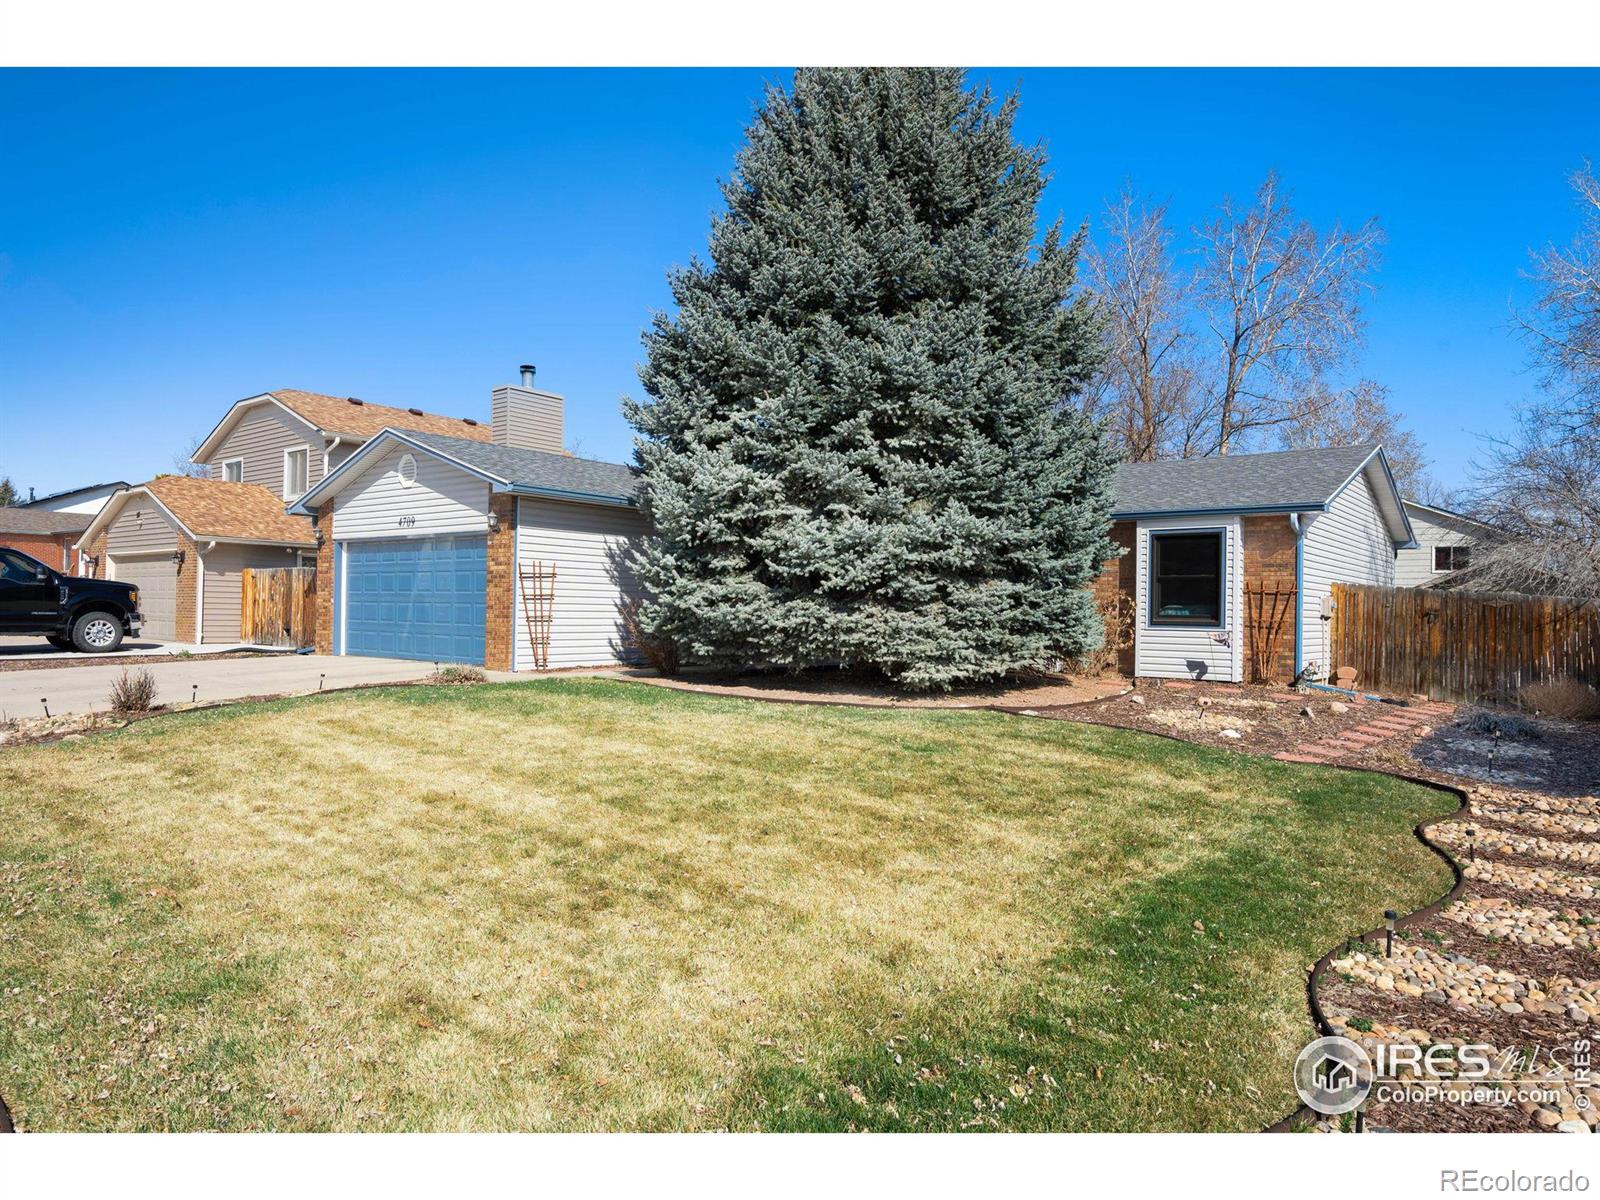 4709 W 6th St Rd, greeley MLS: 4567891005877 Beds: 3 Baths: 2 Price: $400,000